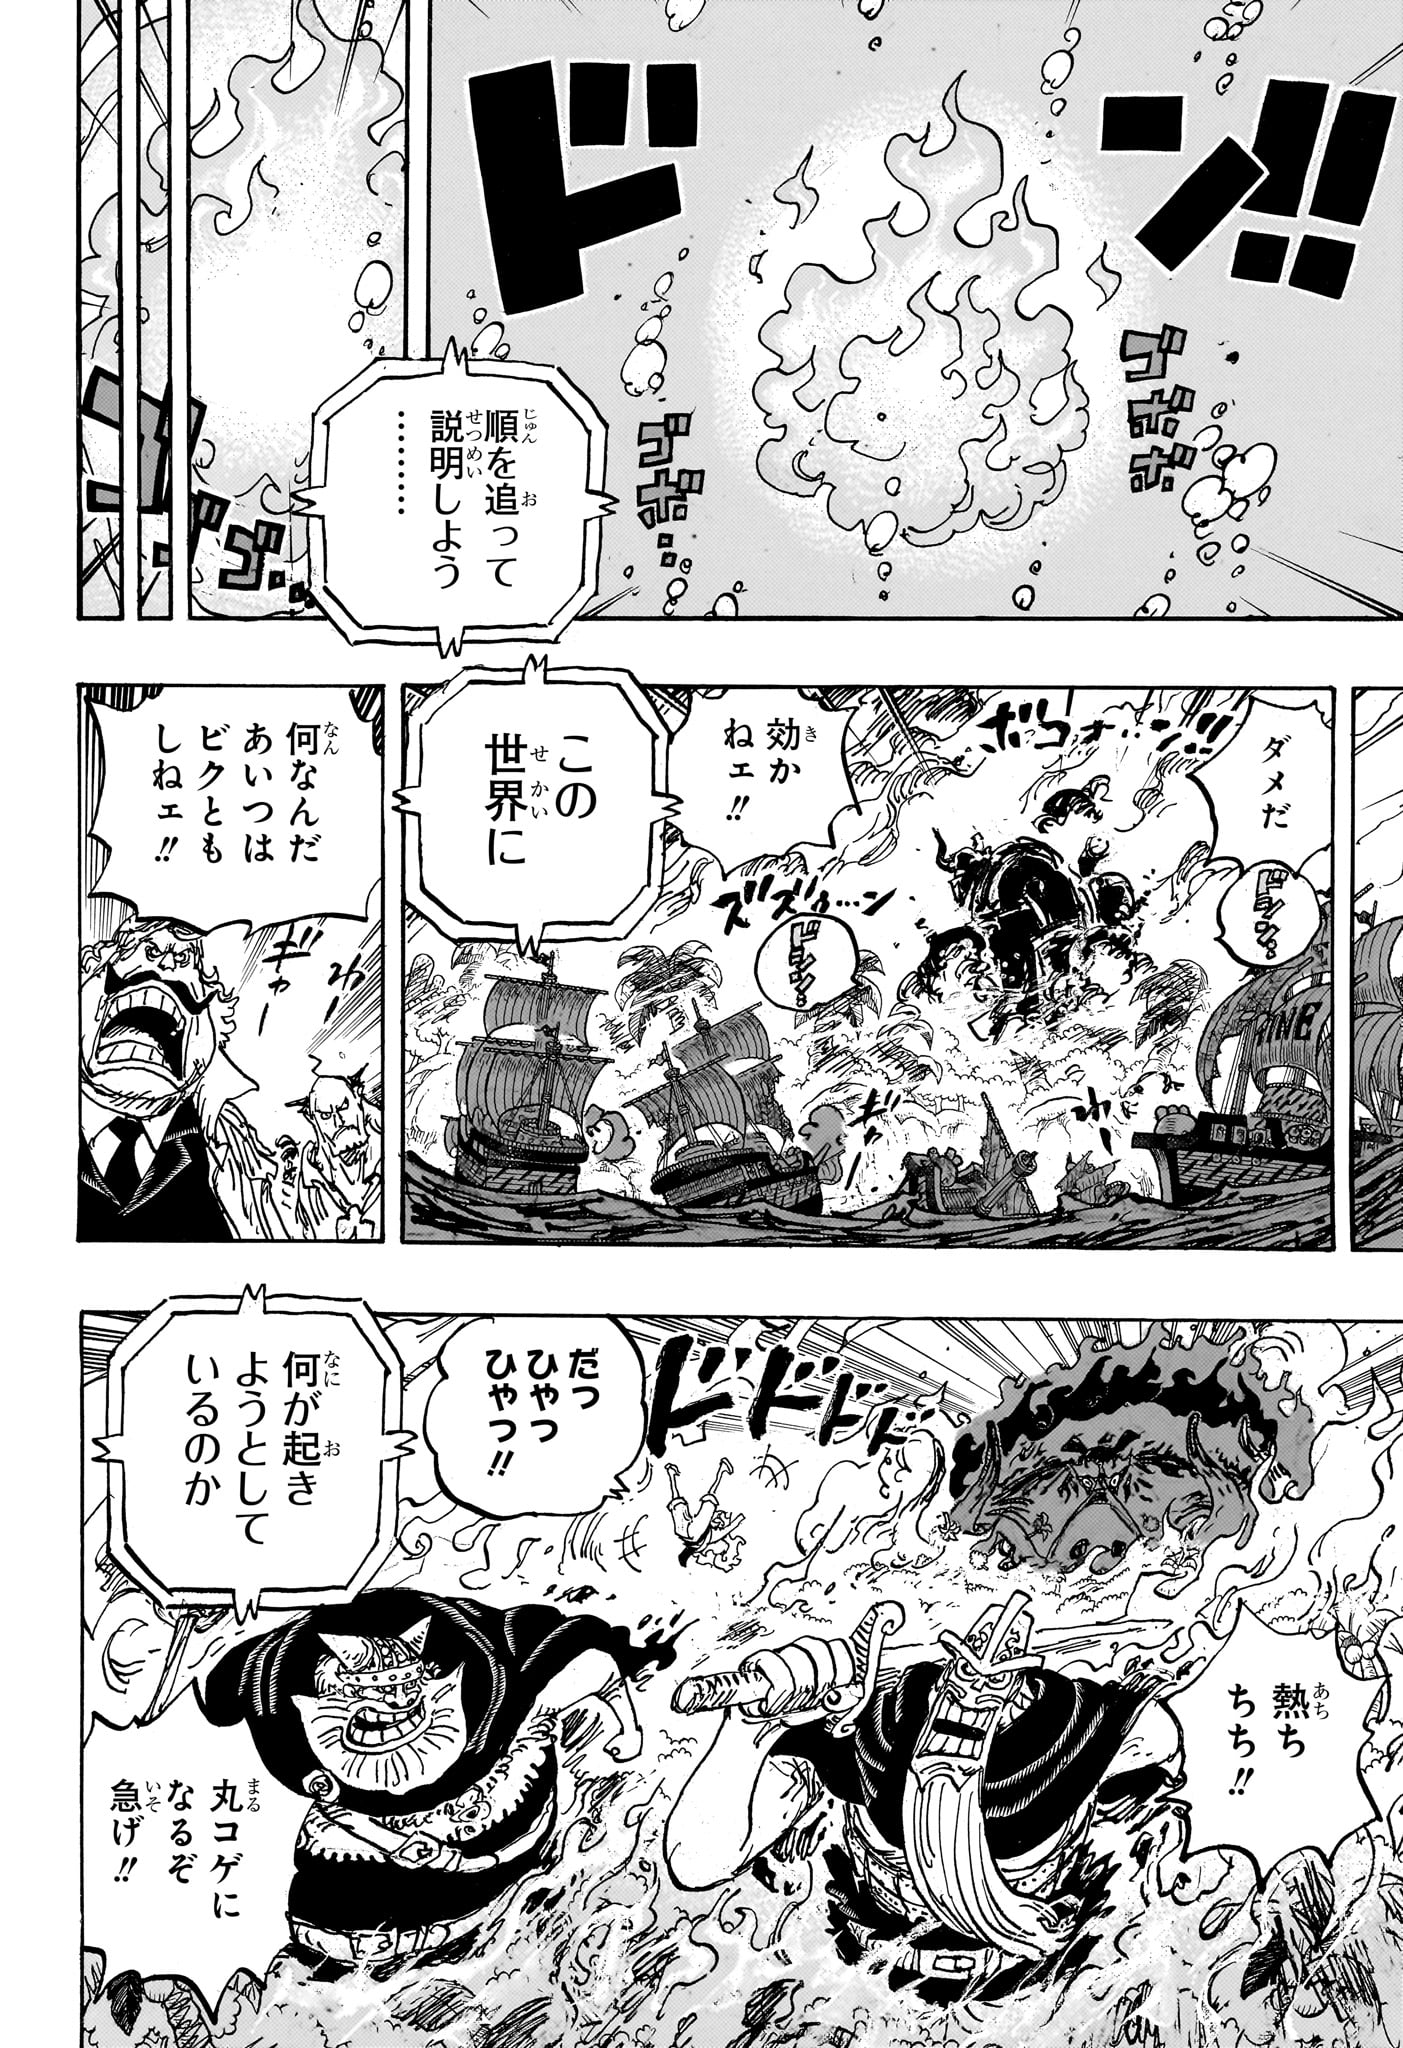 One Piece - Chapter 1114 - Page 10